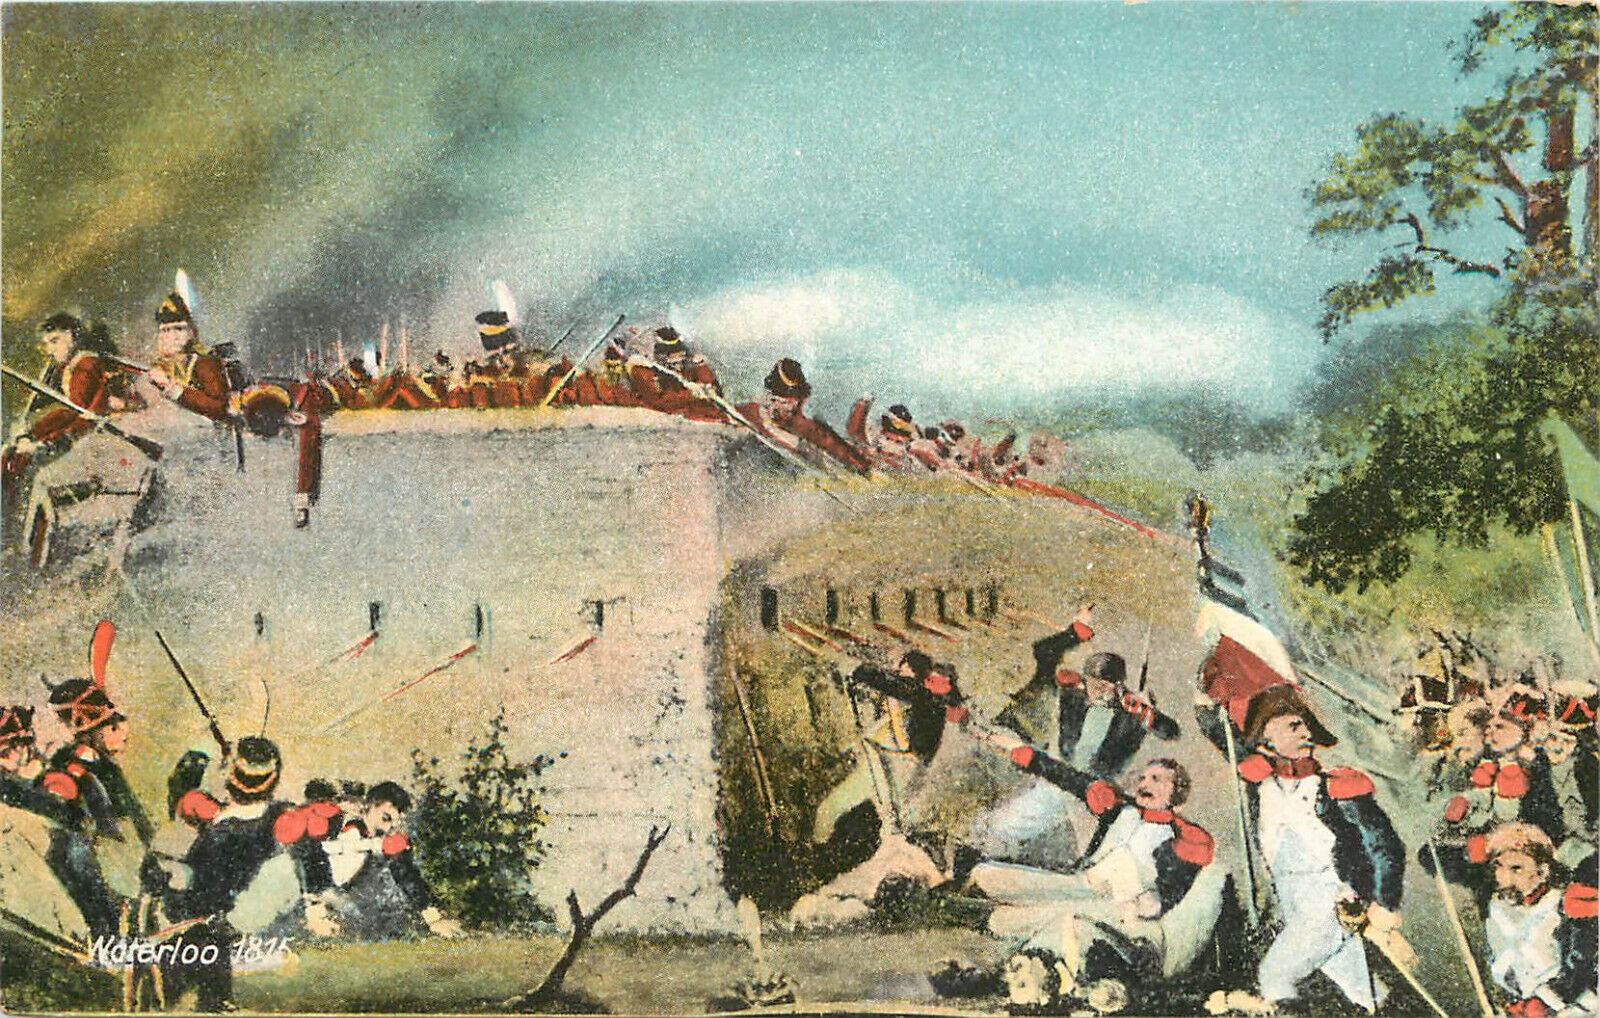 Postcard Depicting Battle of Waterloo 1815 Infantry Attack on Castle Hougoumont